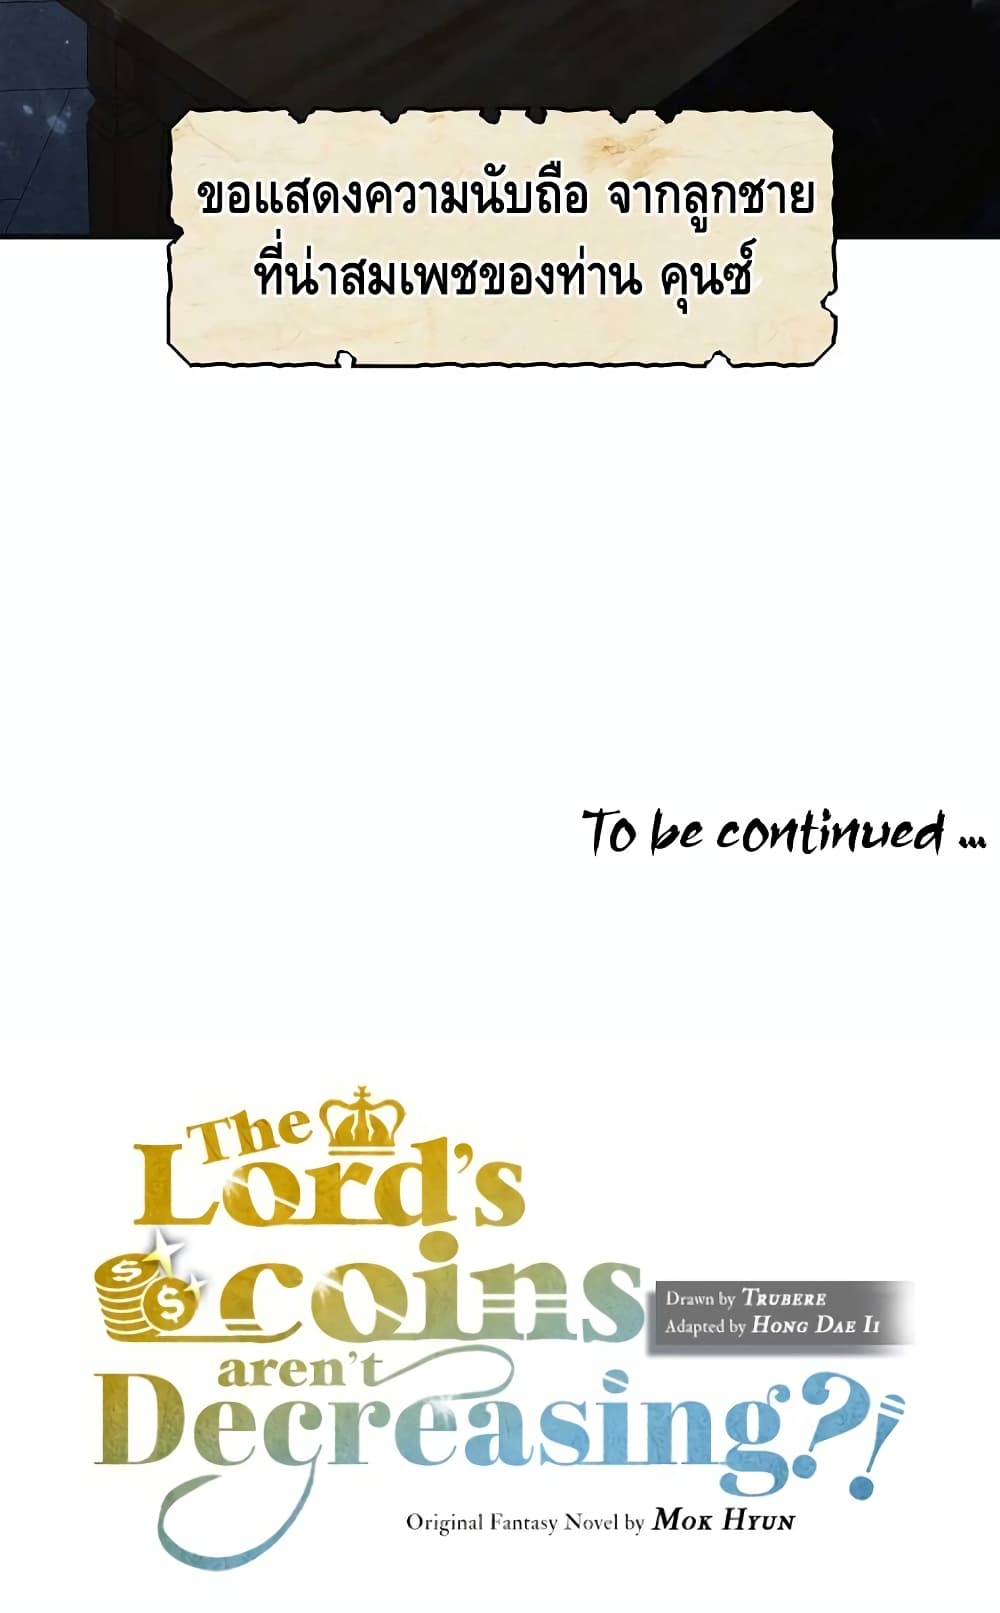 Lord's Gold Coins 37-37